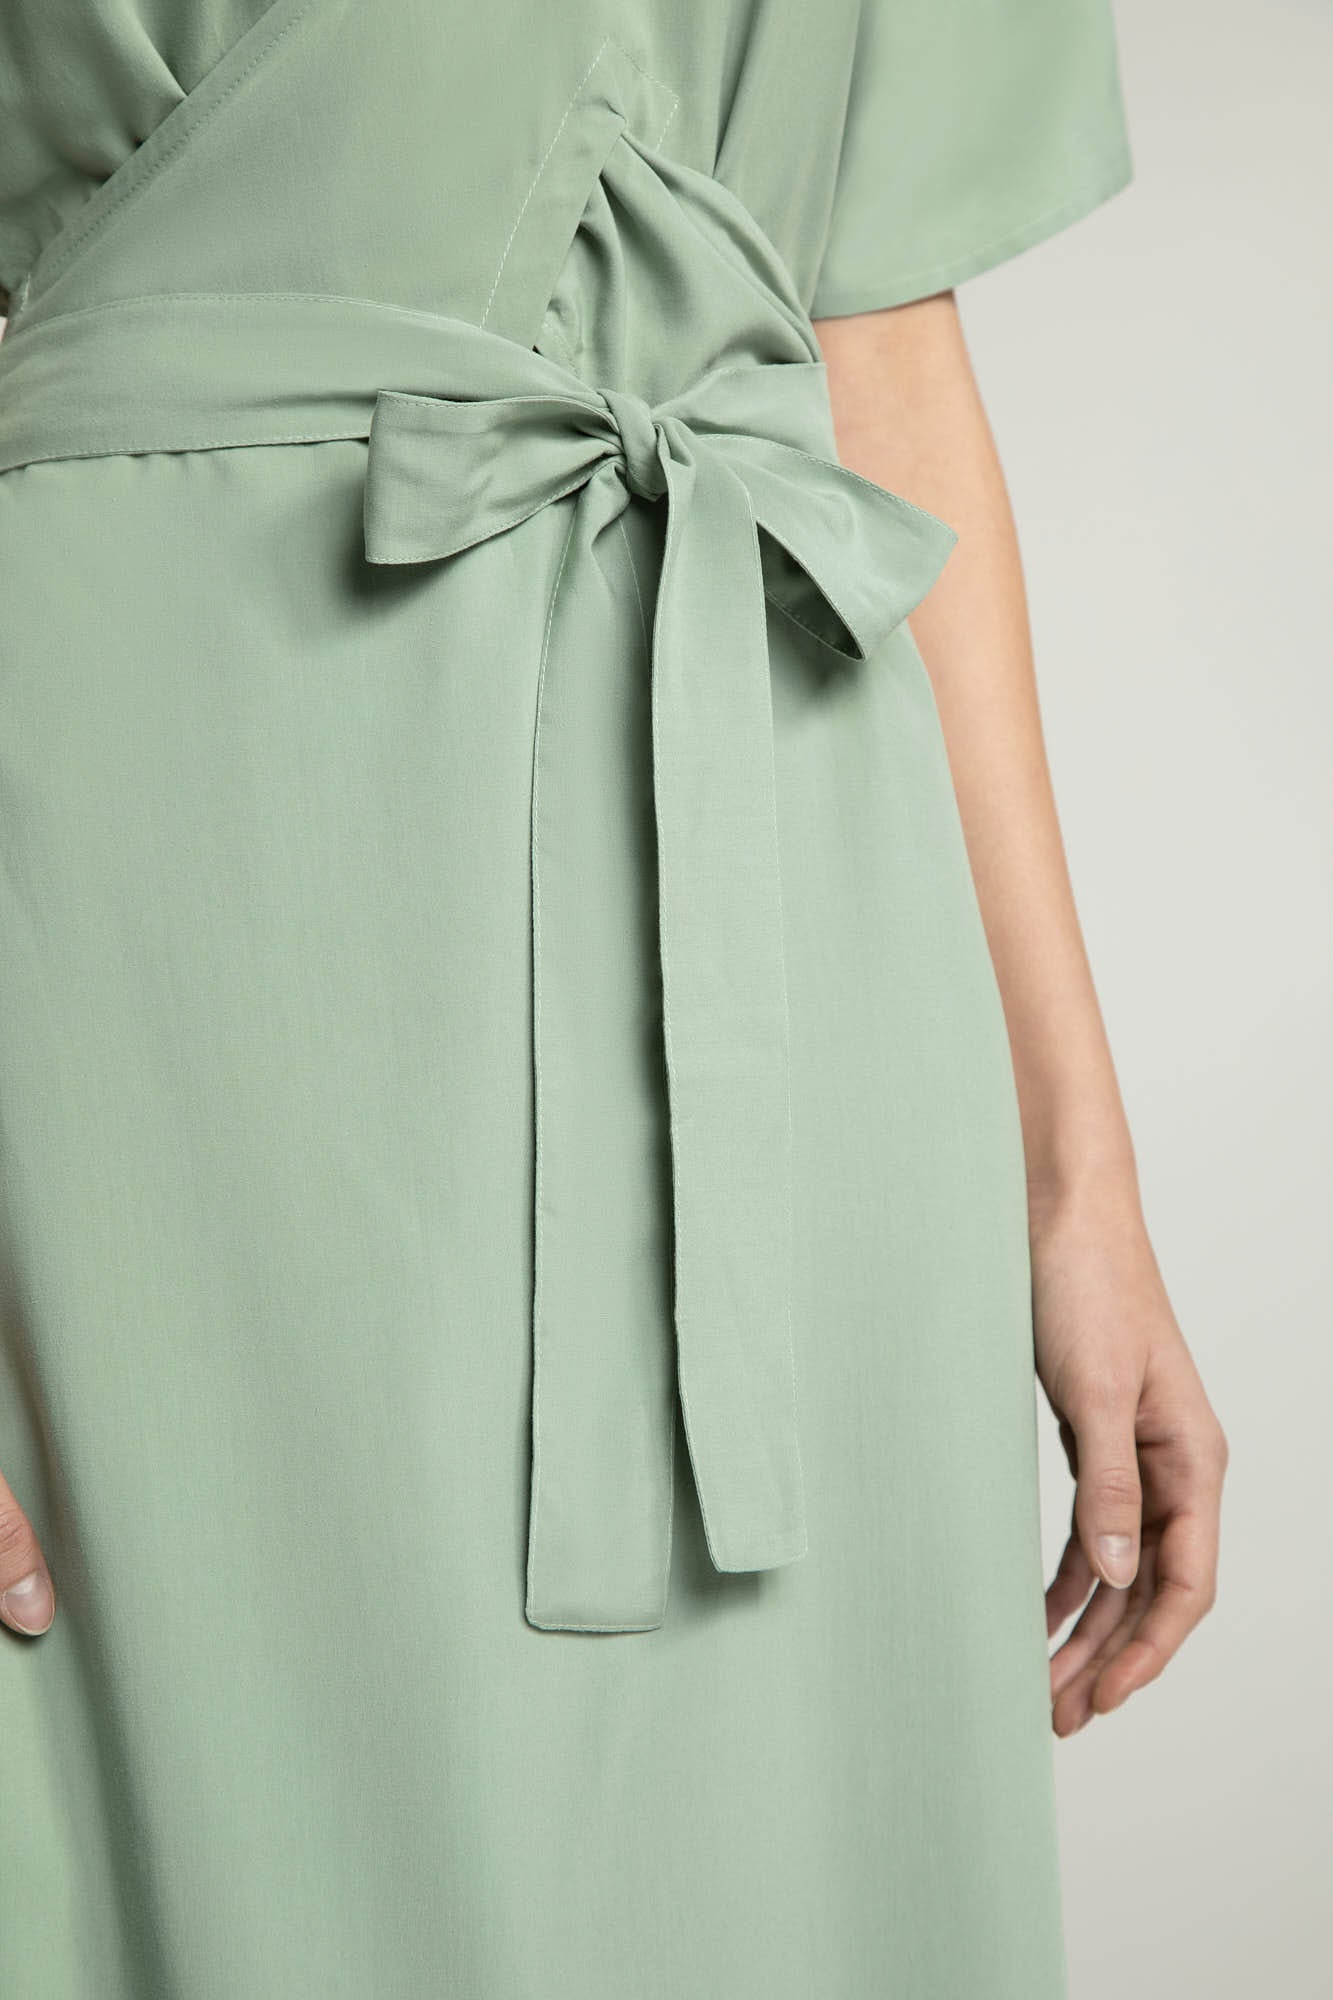 Dress ADEENA in mint by LOVJOI made of Ecovero™ (ST)